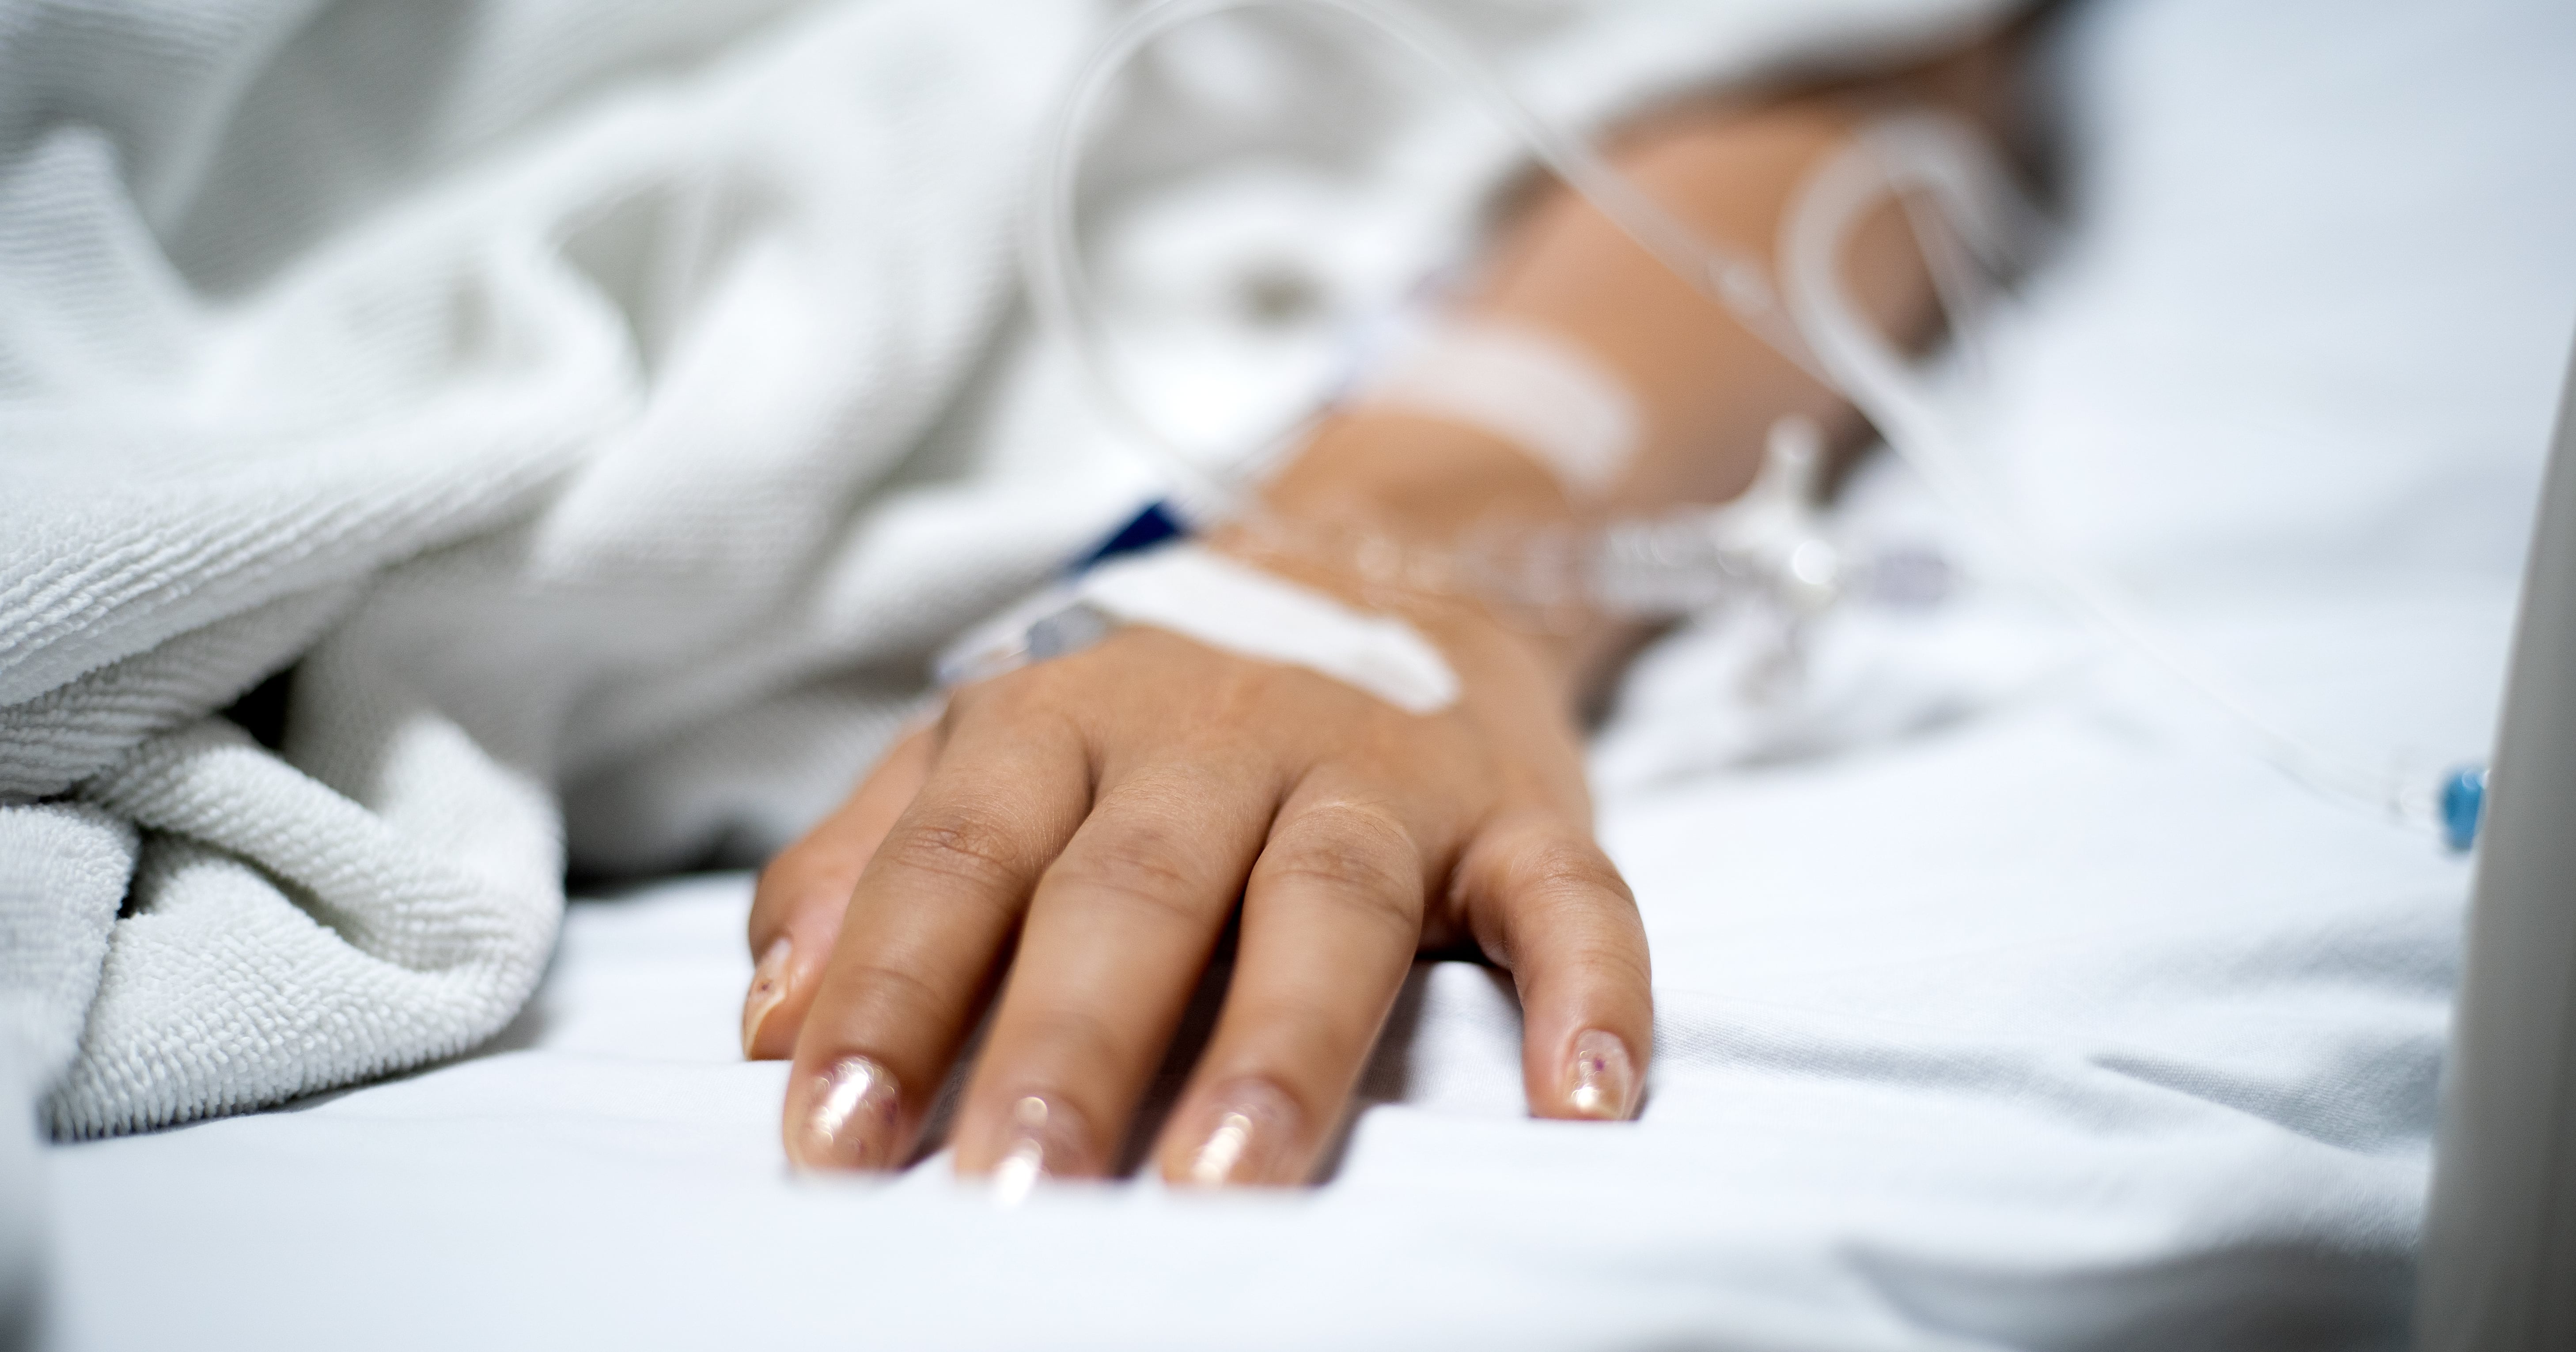 What Really Happens When You’re in a Coma, According to a Neurologist